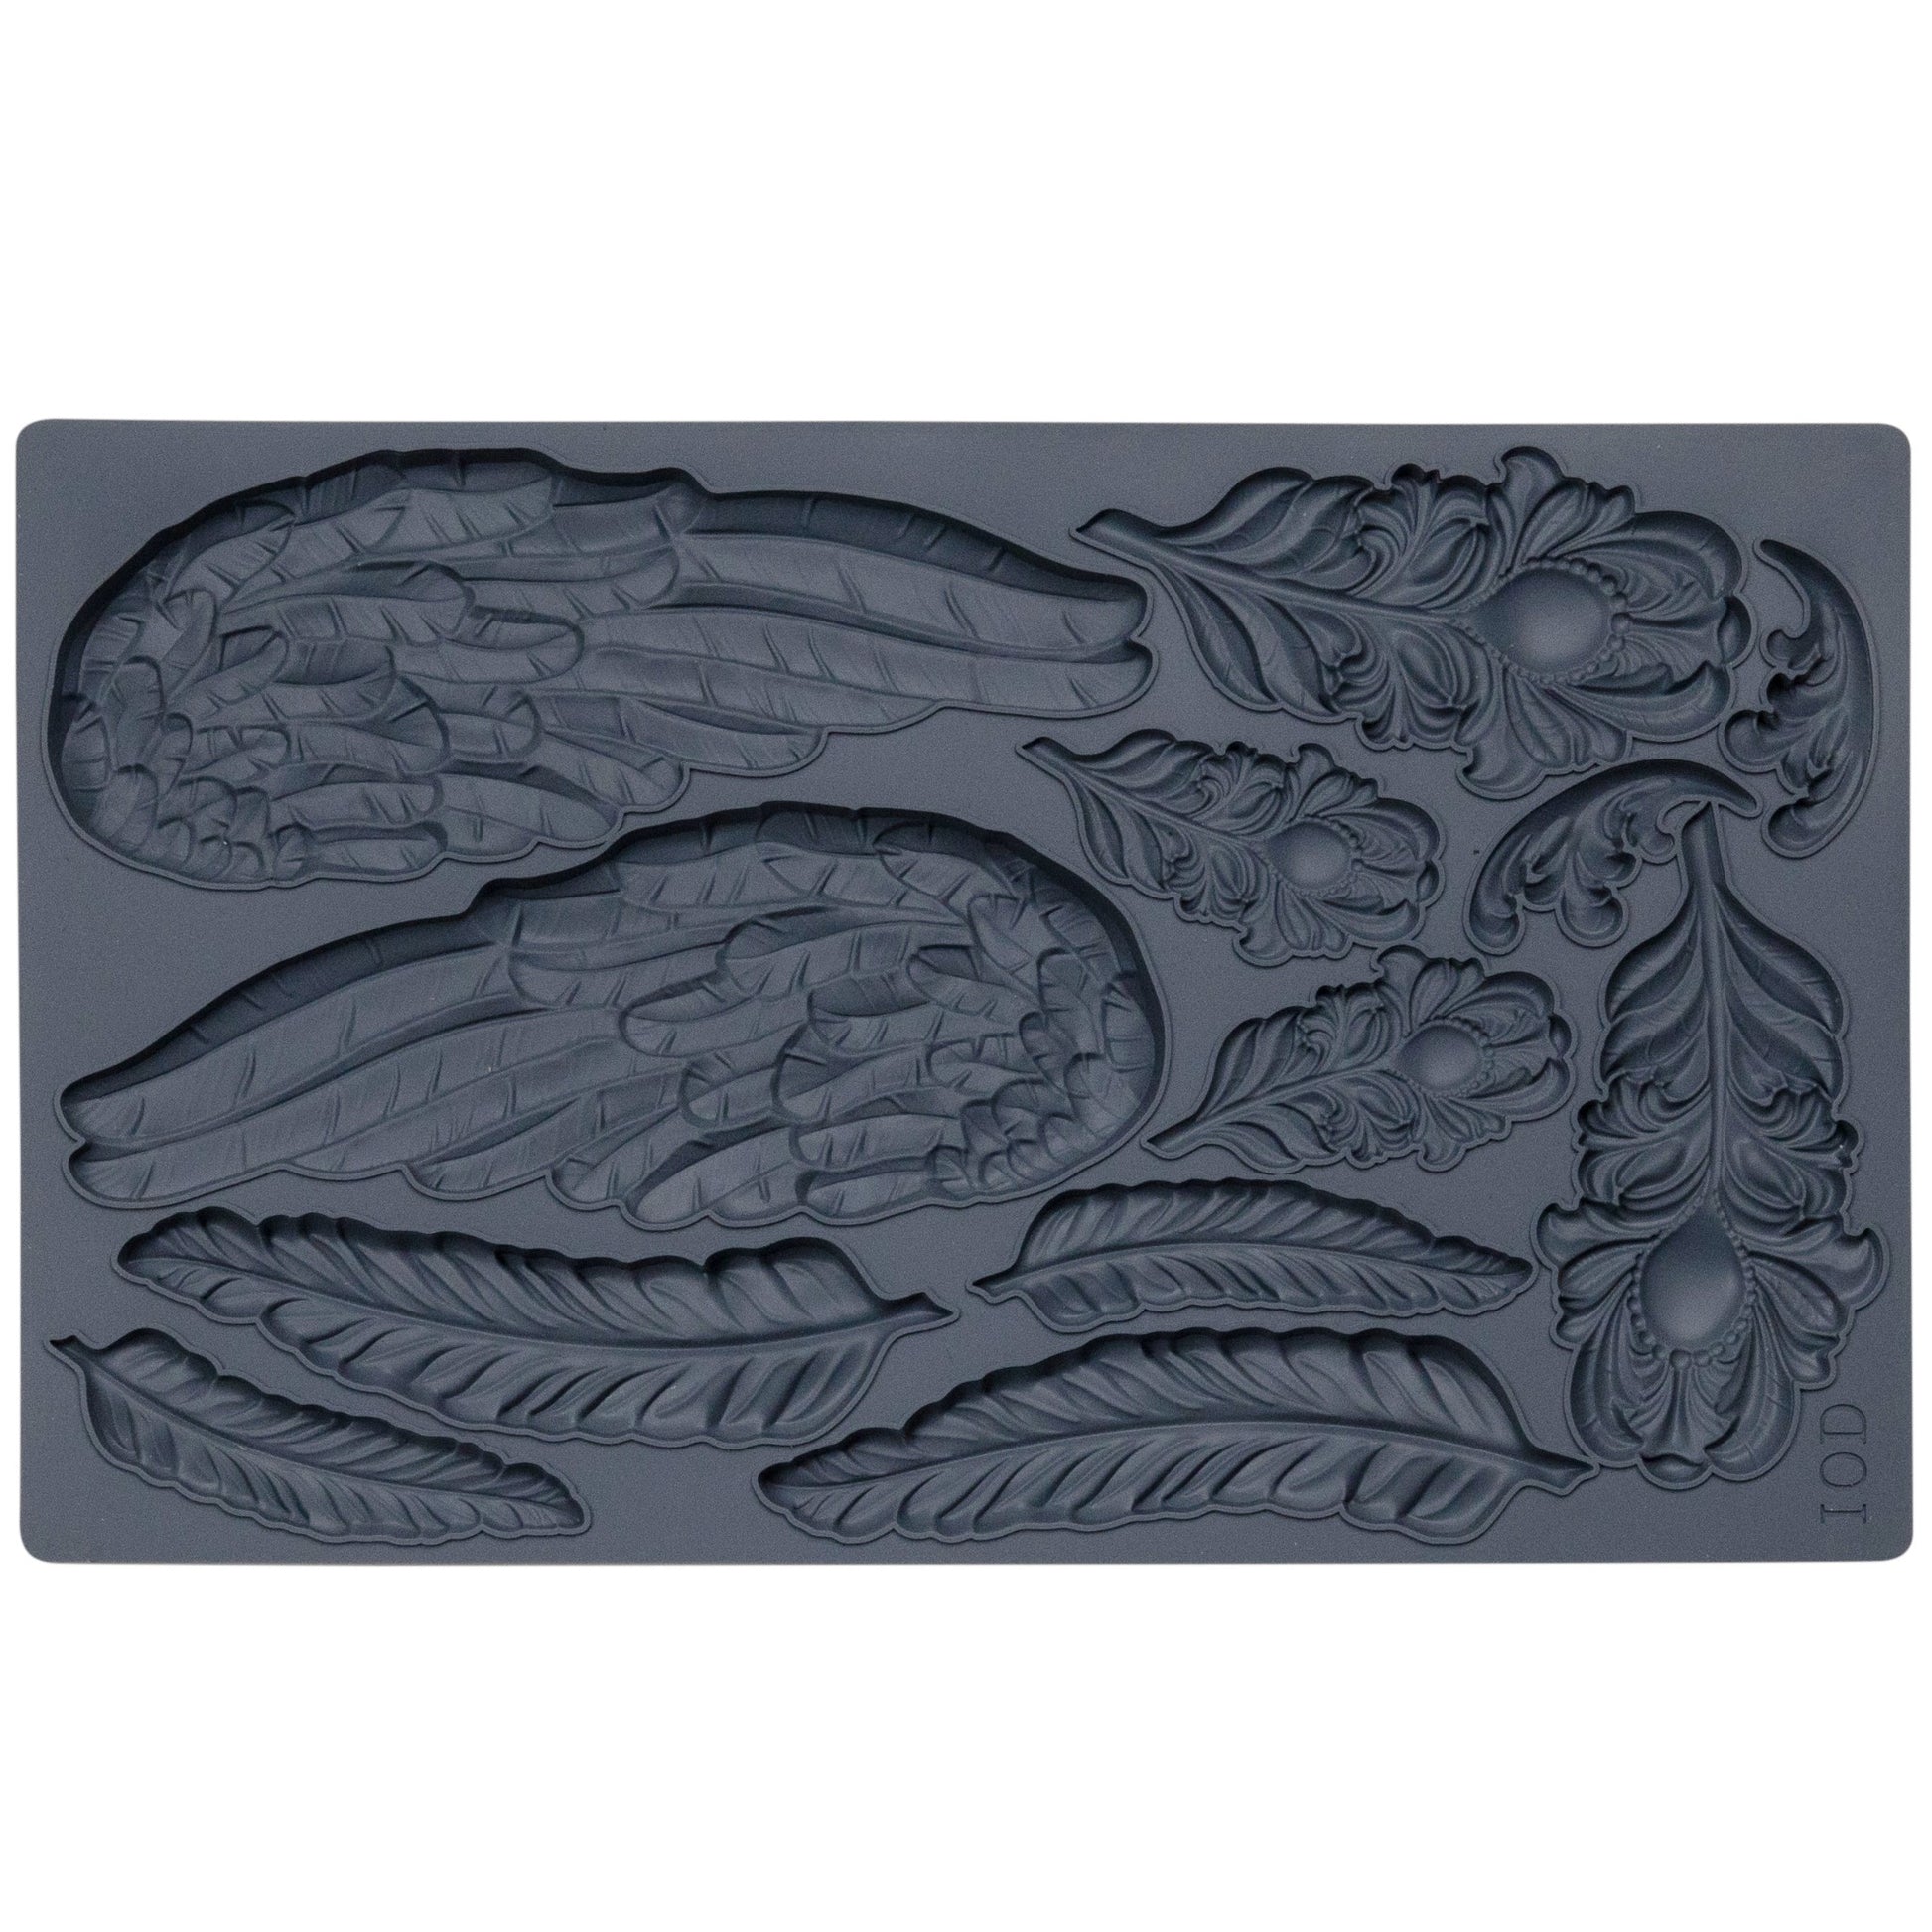 IOD Silicone Mold "Wings and Feathers" available at Milton's Daughter